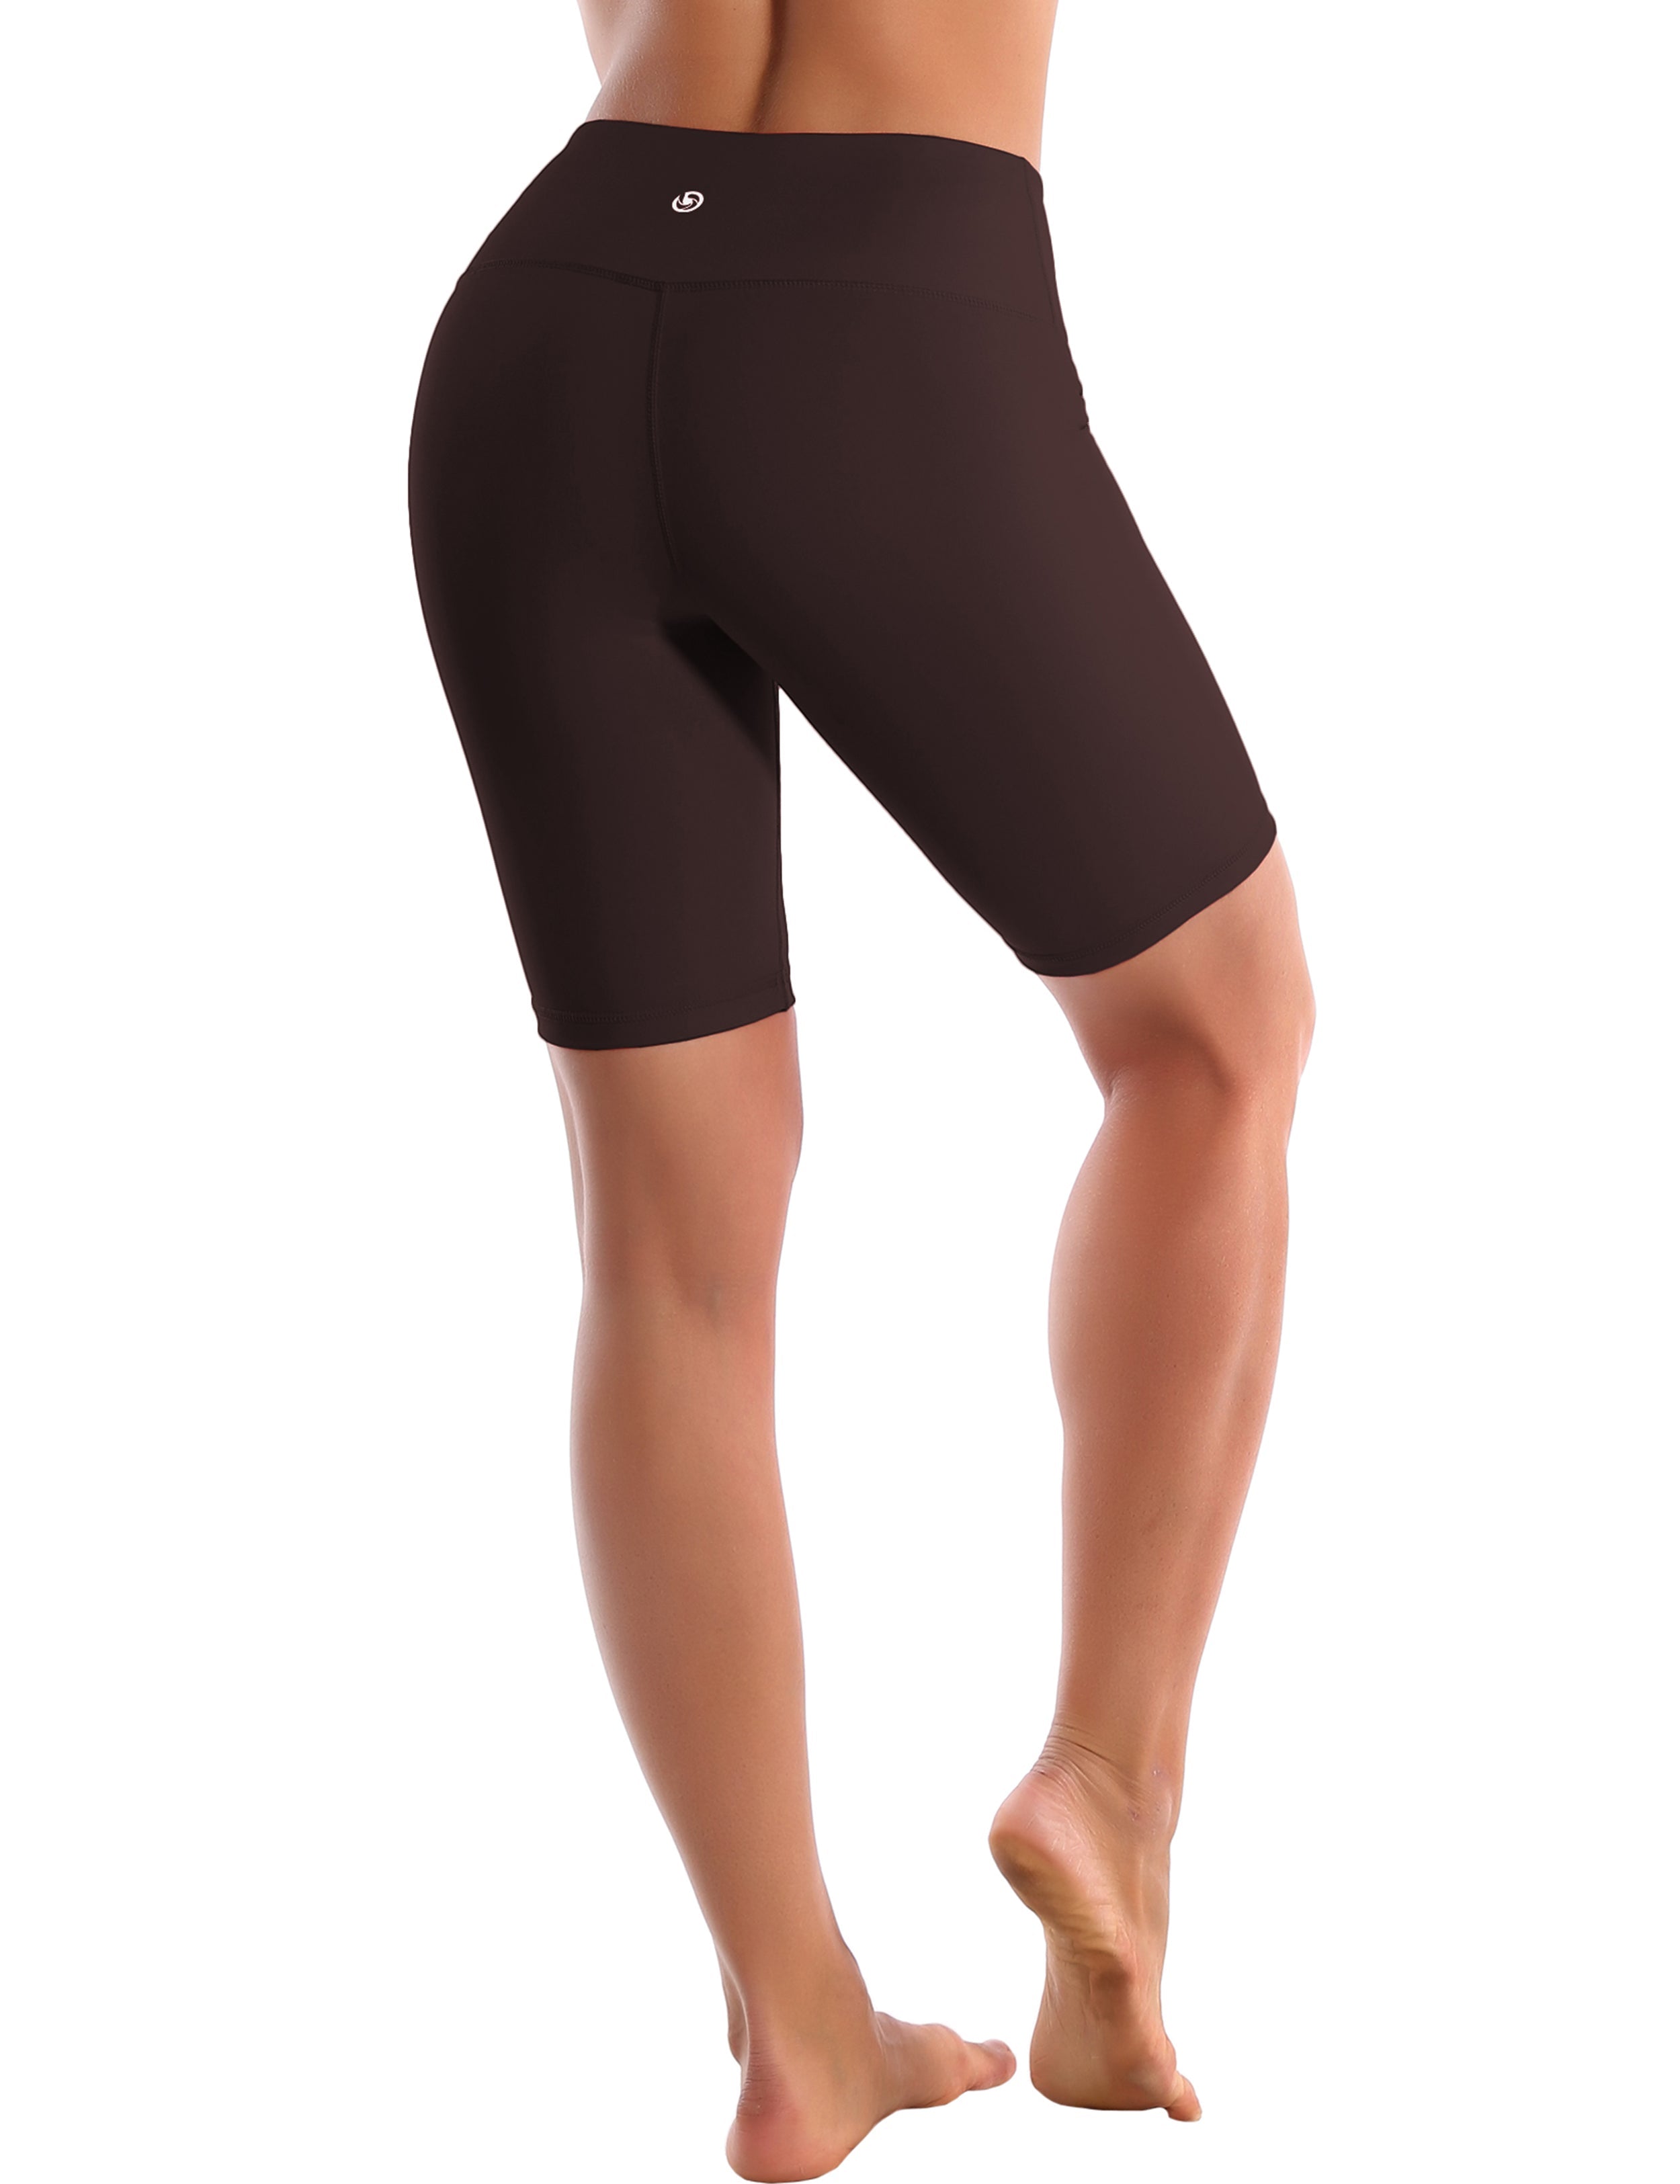 8" High Waist Tall Size Shorts mahoganymaroon Sleek, soft, smooth and totally comfortable: our newest style is here. Softest-ever fabric High elasticity High density 4-way stretch Fabric doesn't attract lint easily No see-through Moisture-wicking Machine wash 75% Nylon, 25% Spandex